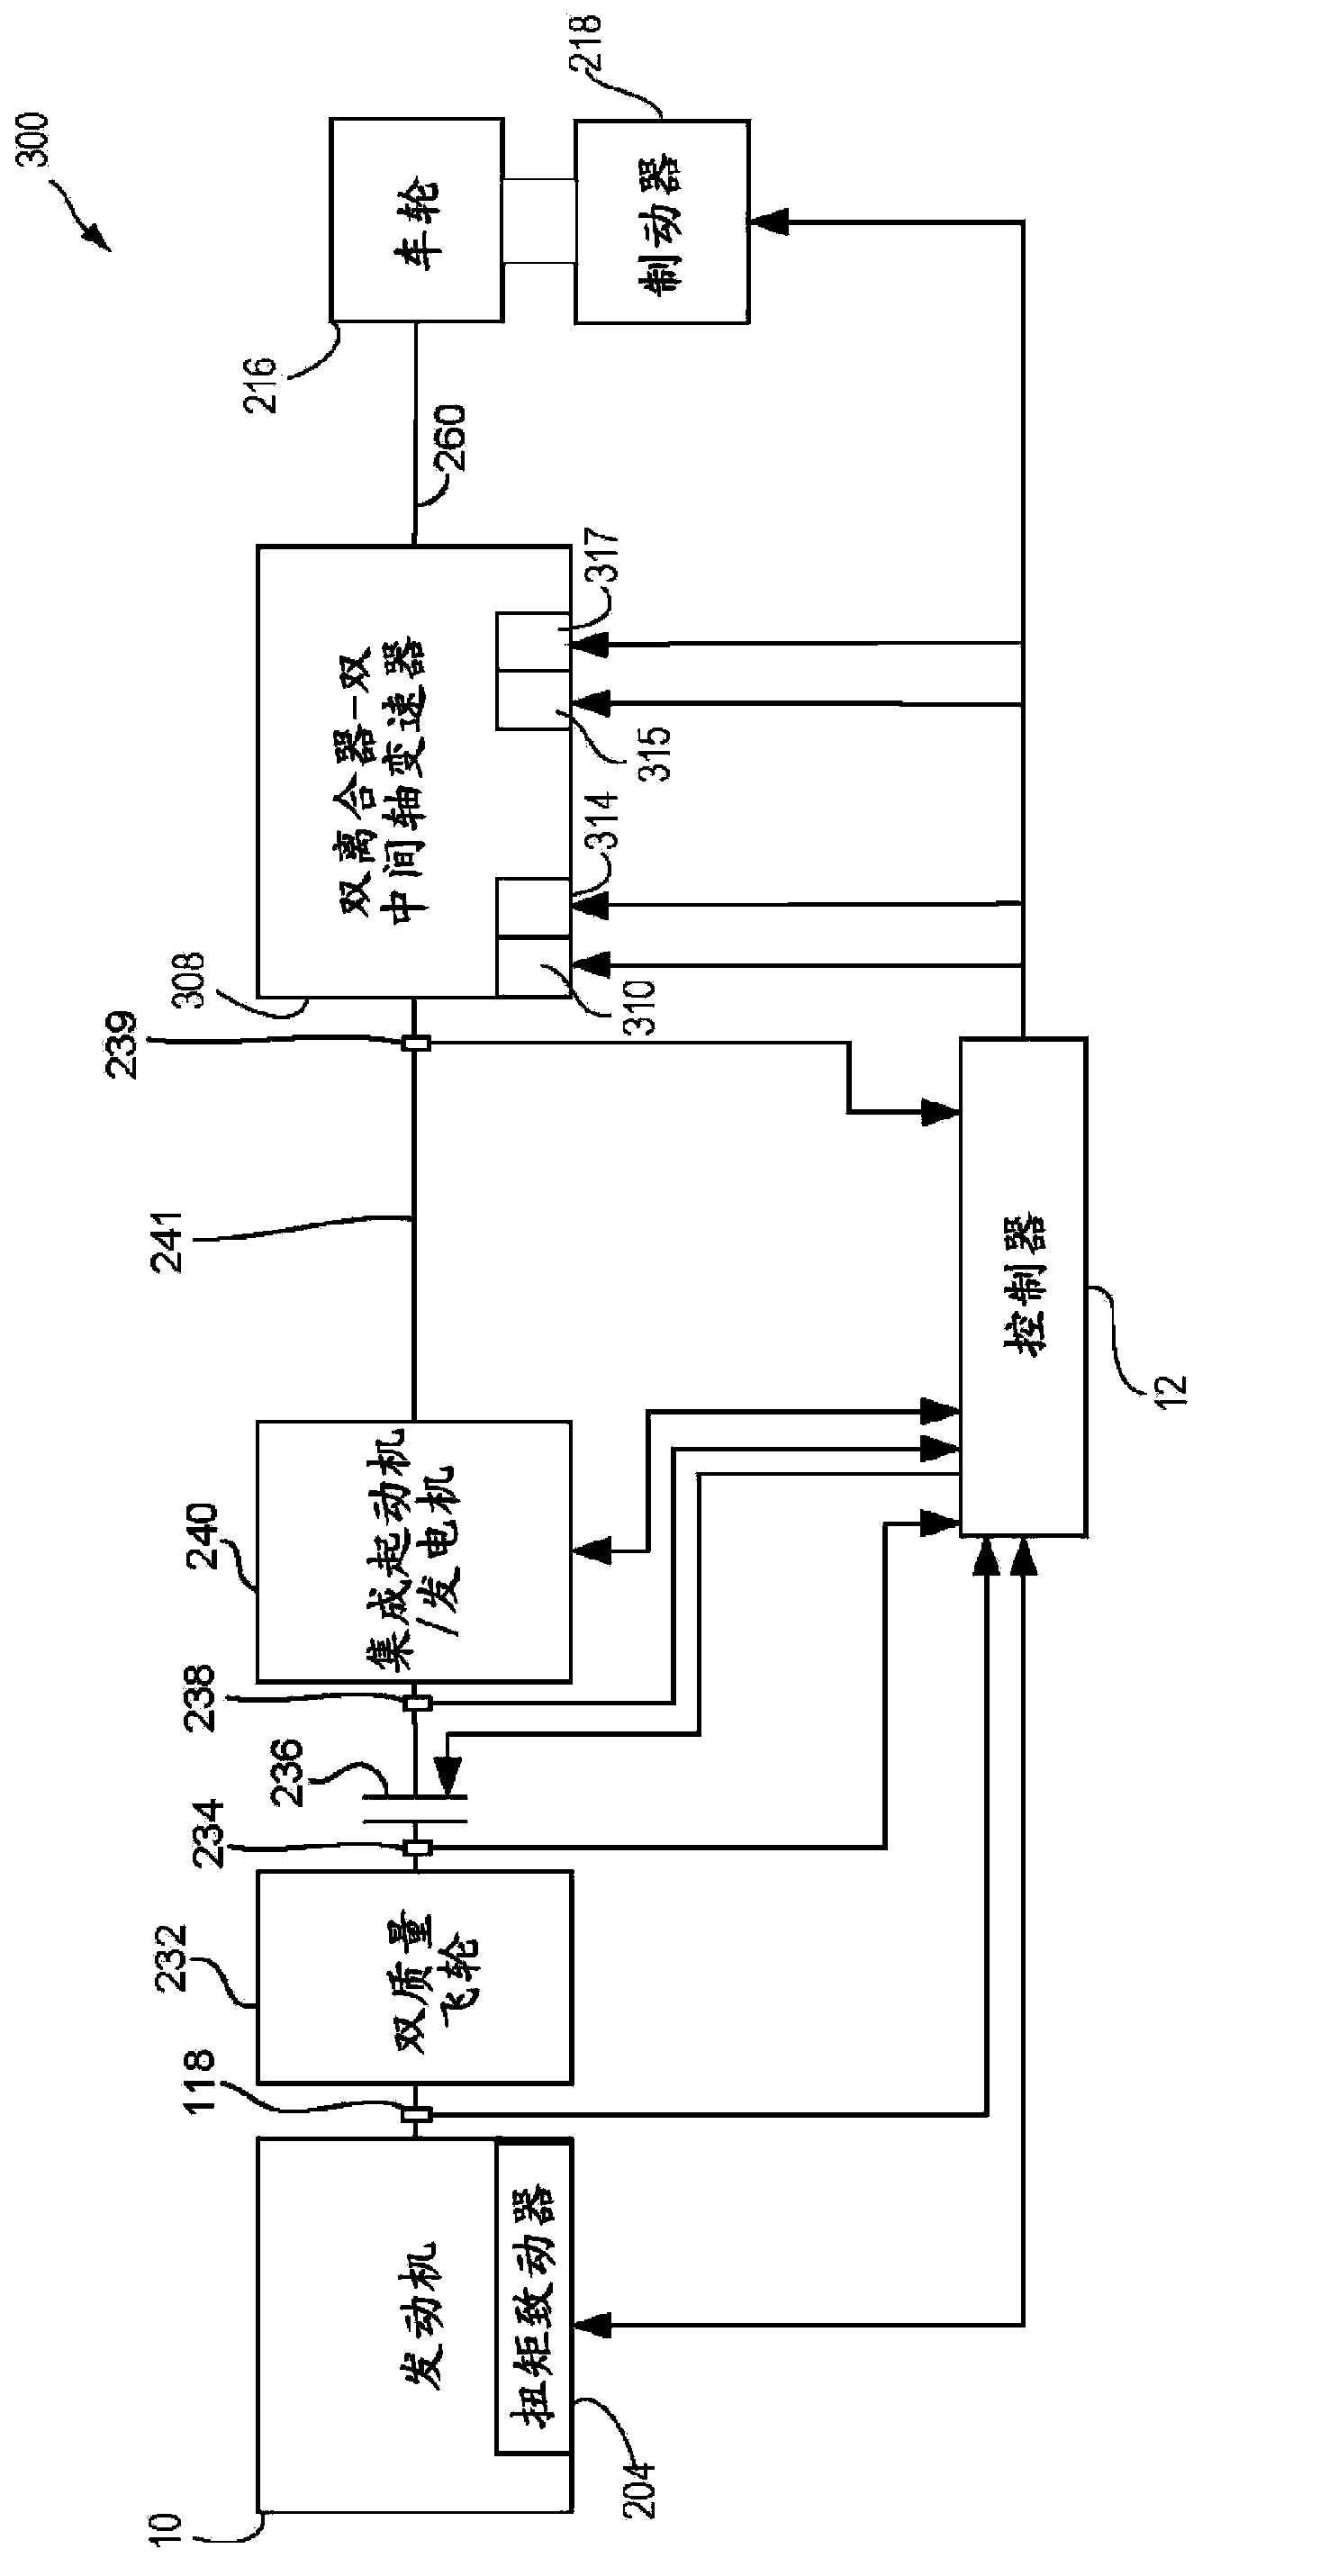 Method and system for hybrid vehicle